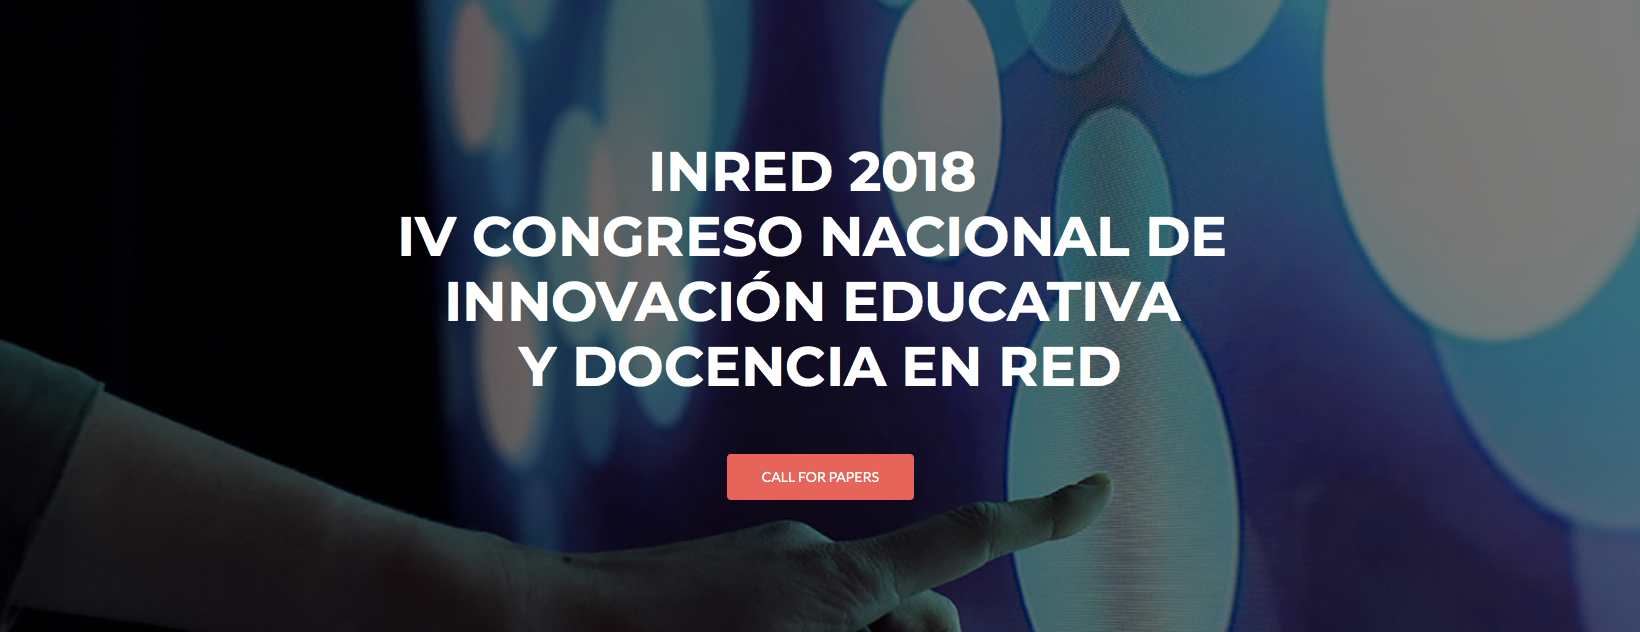 INRED 2018